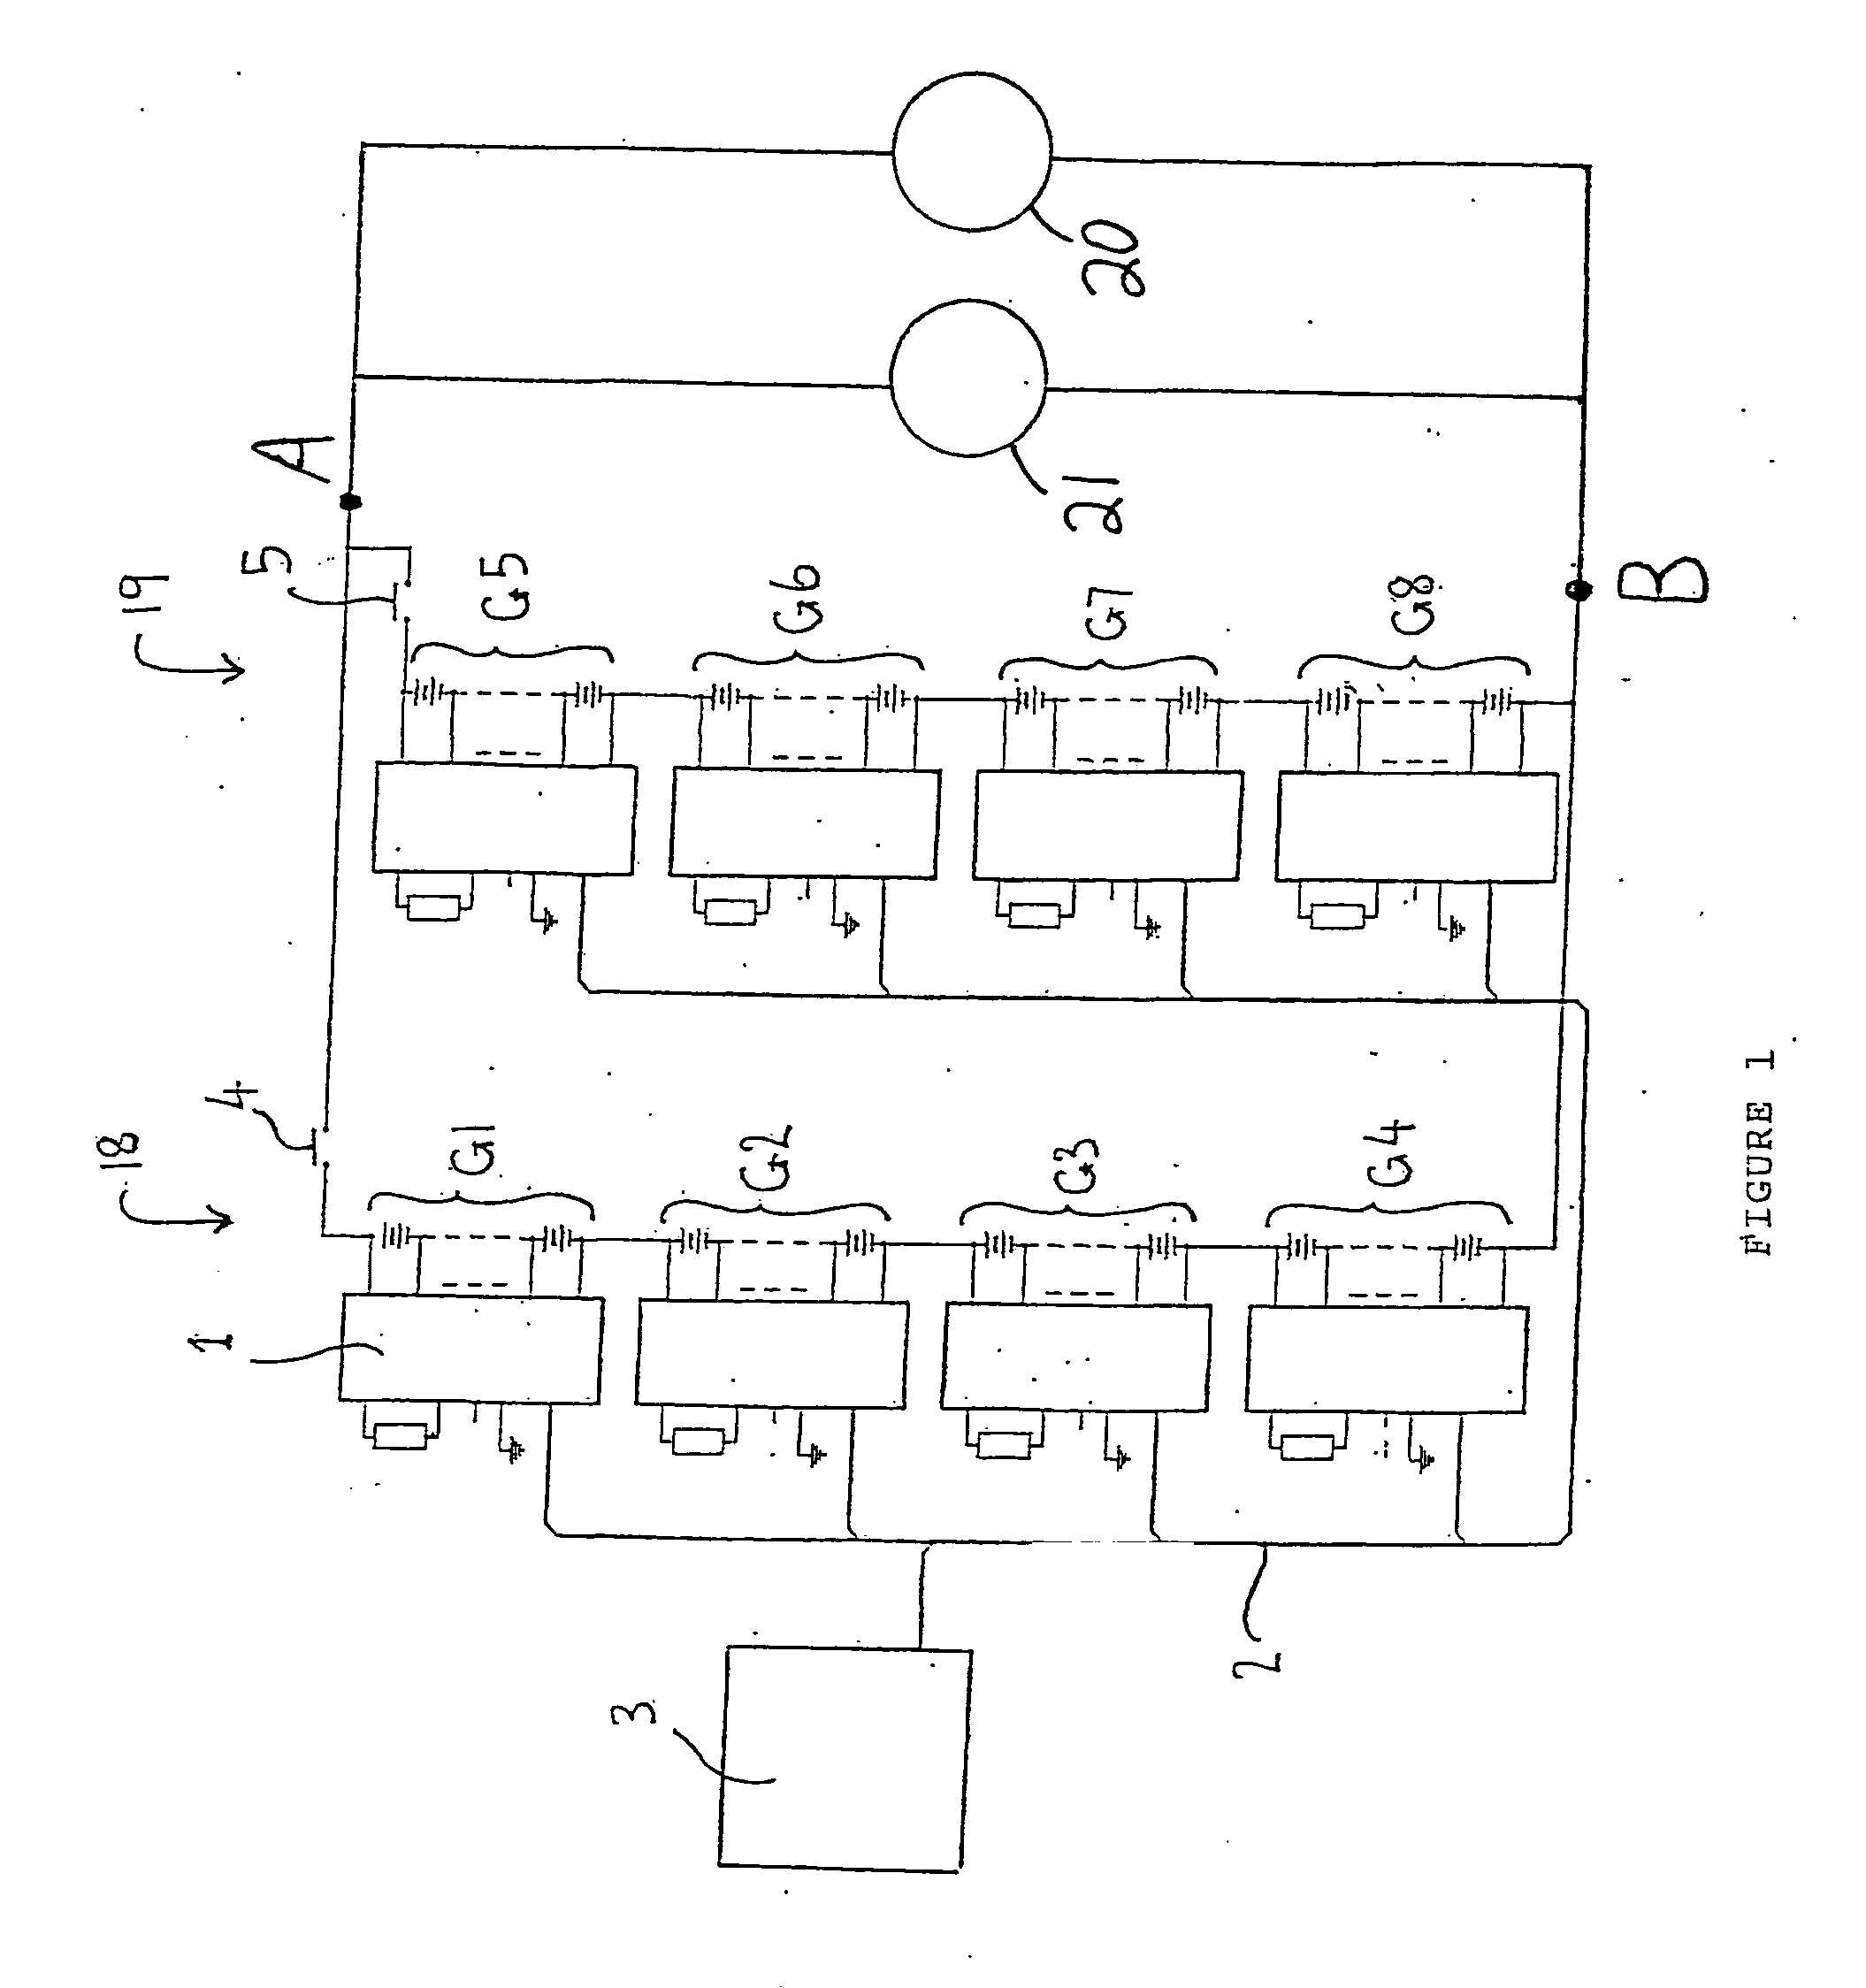 Battery management unit, system and method